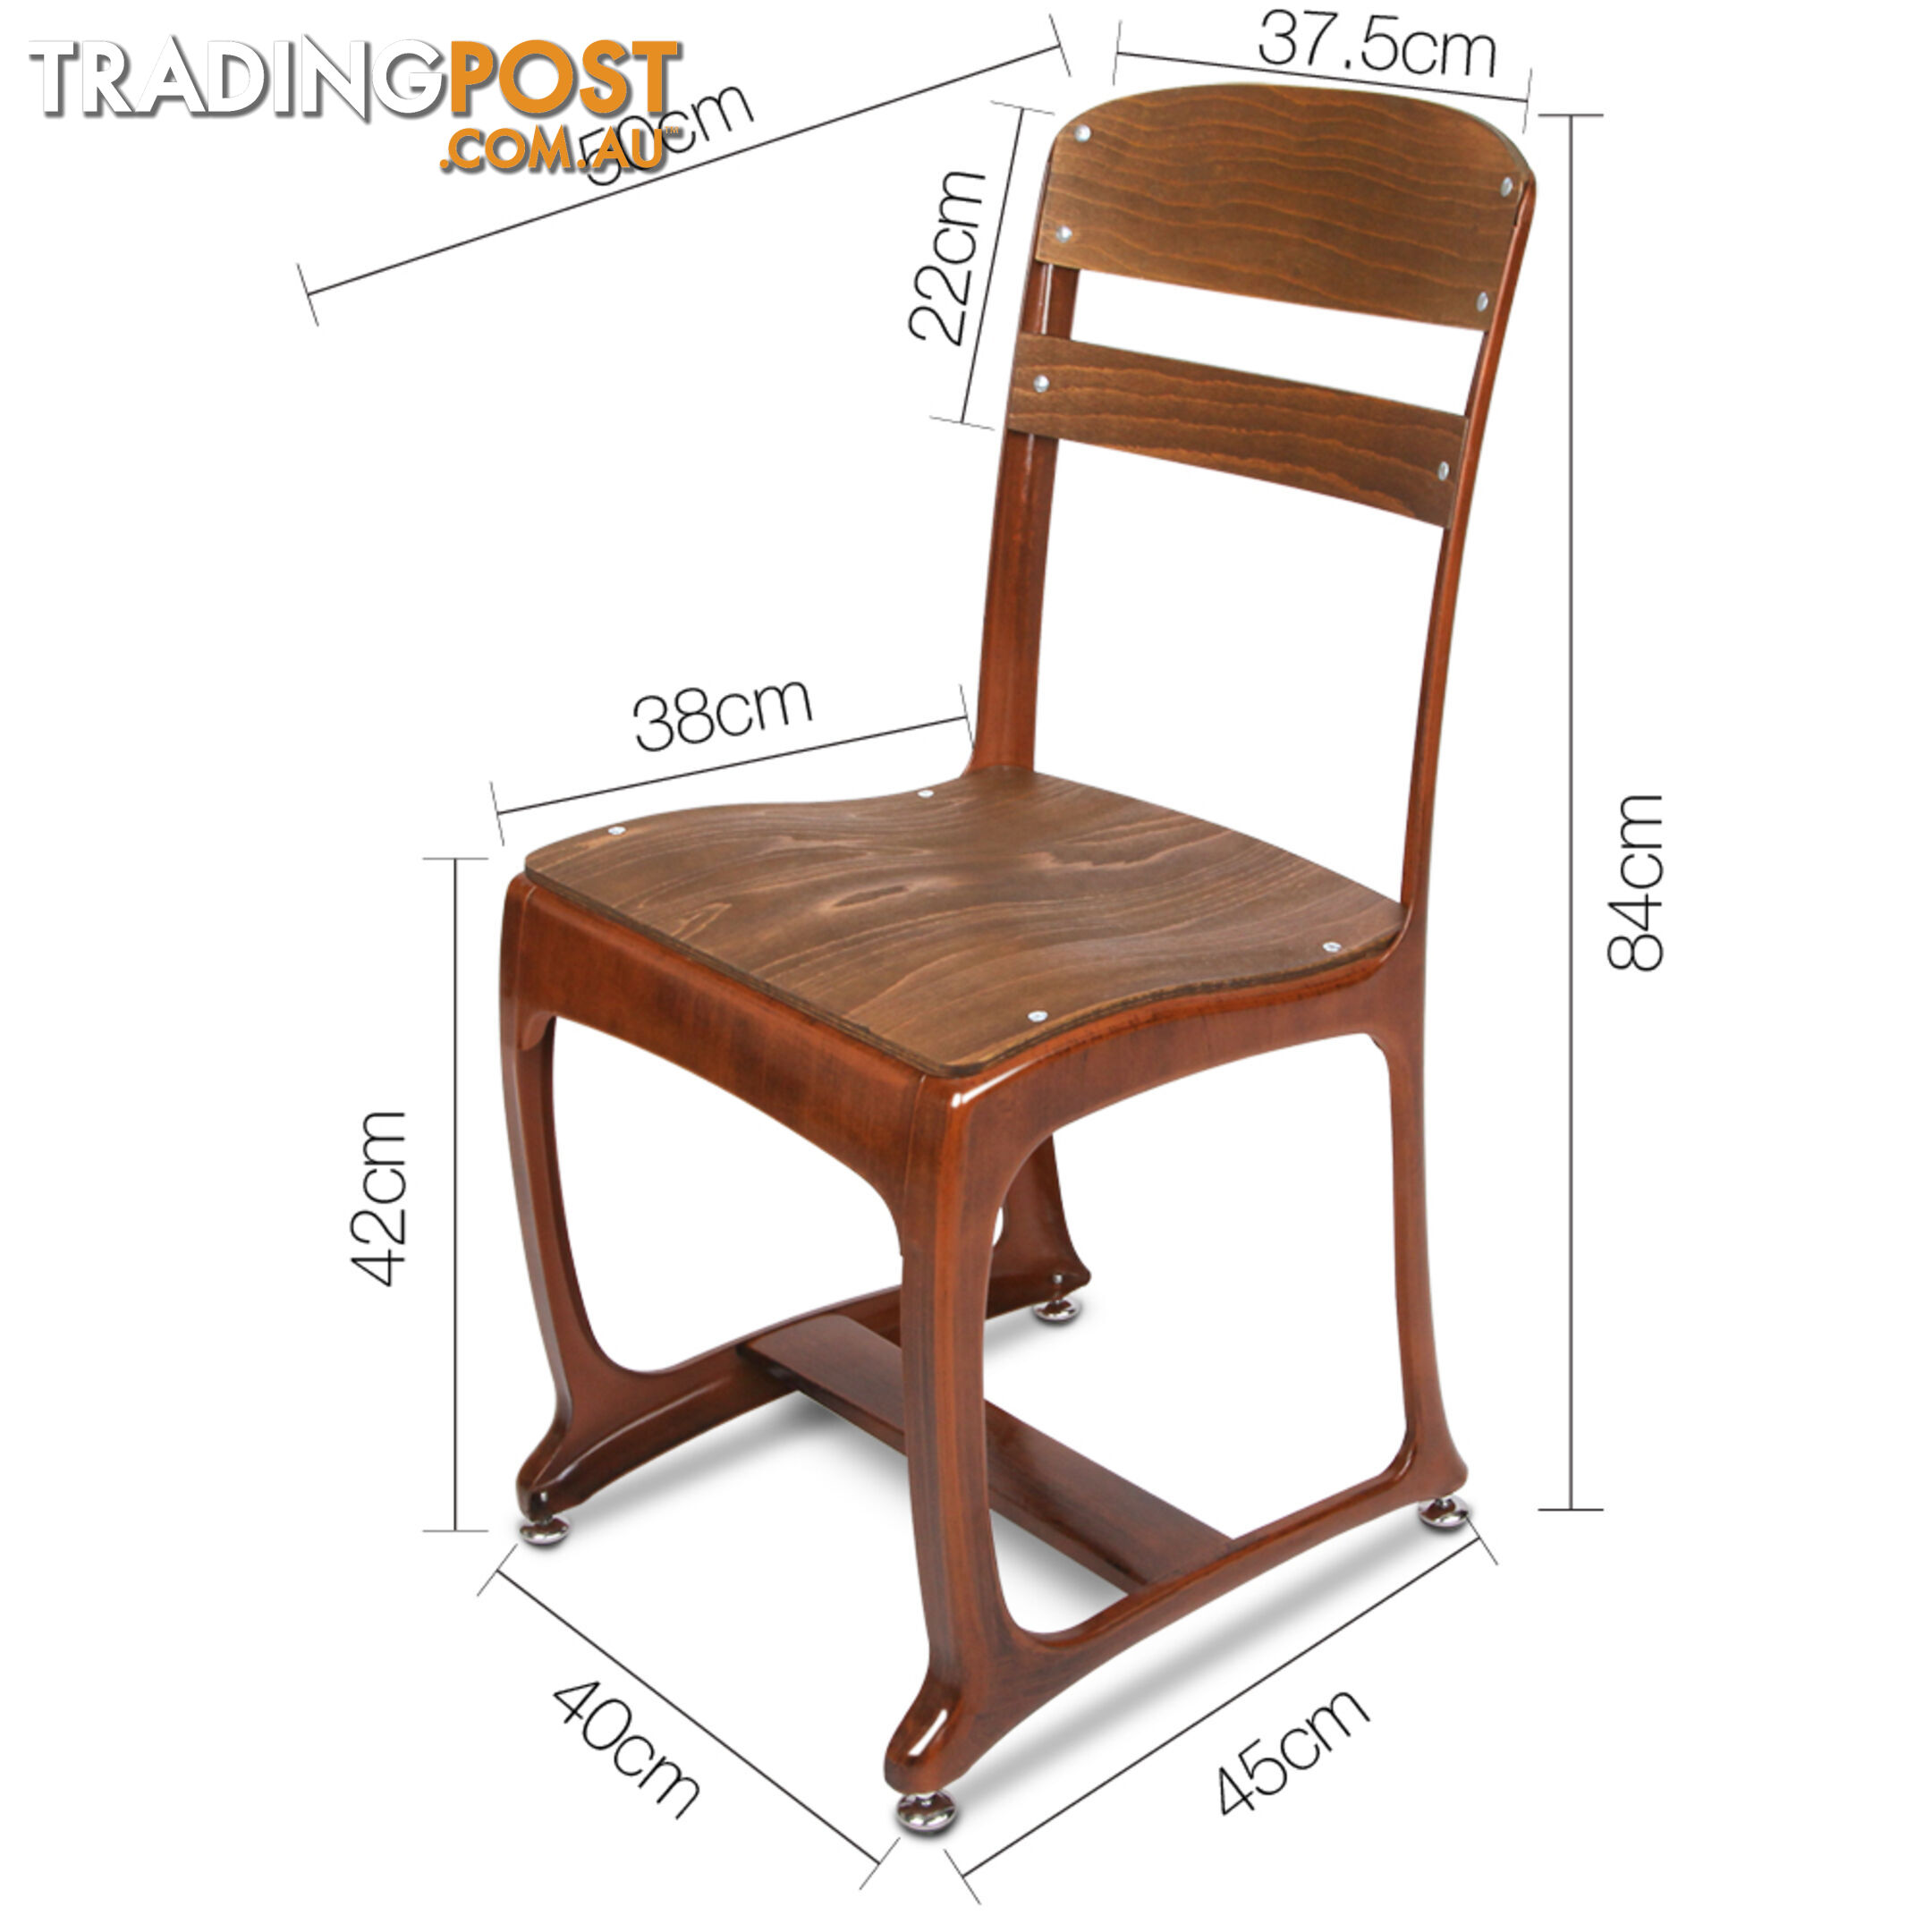 2 x Replica Eton Dining Chairs Vintage Warehouse Industrial Style Chair Copper